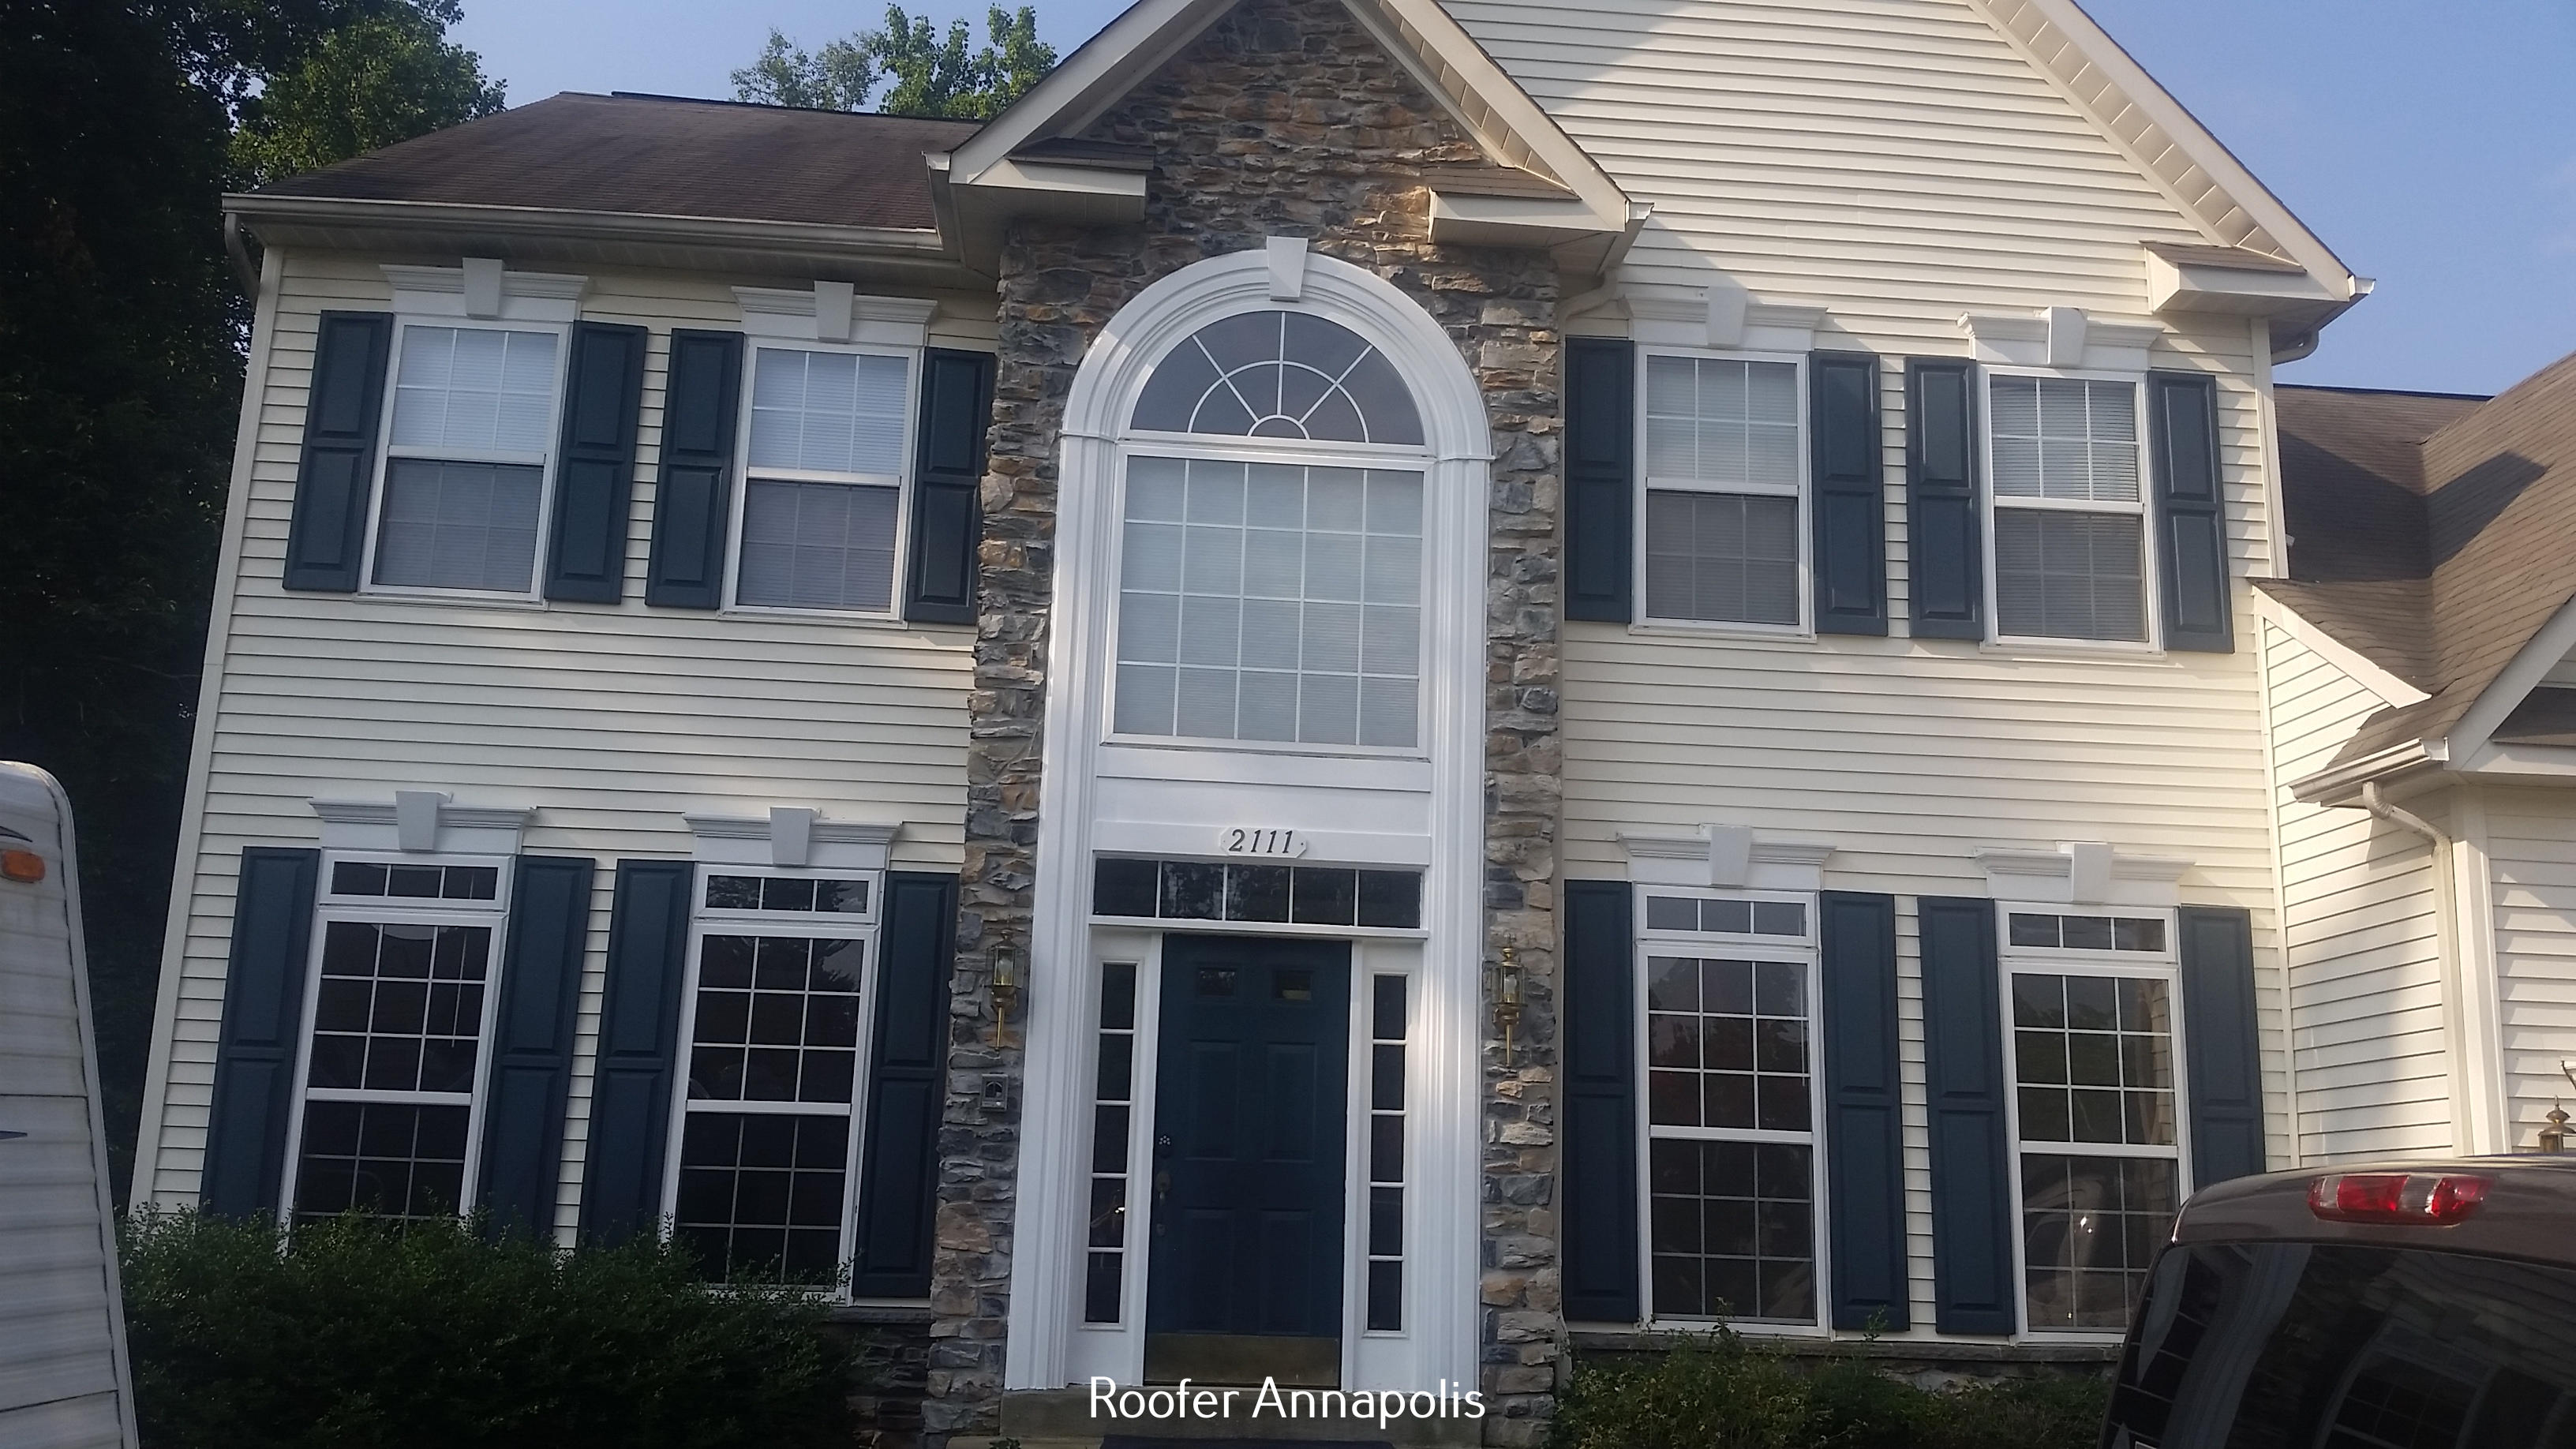 Superior Restorations & Construction Emerges as Premier Annapolis Roofing Contractor